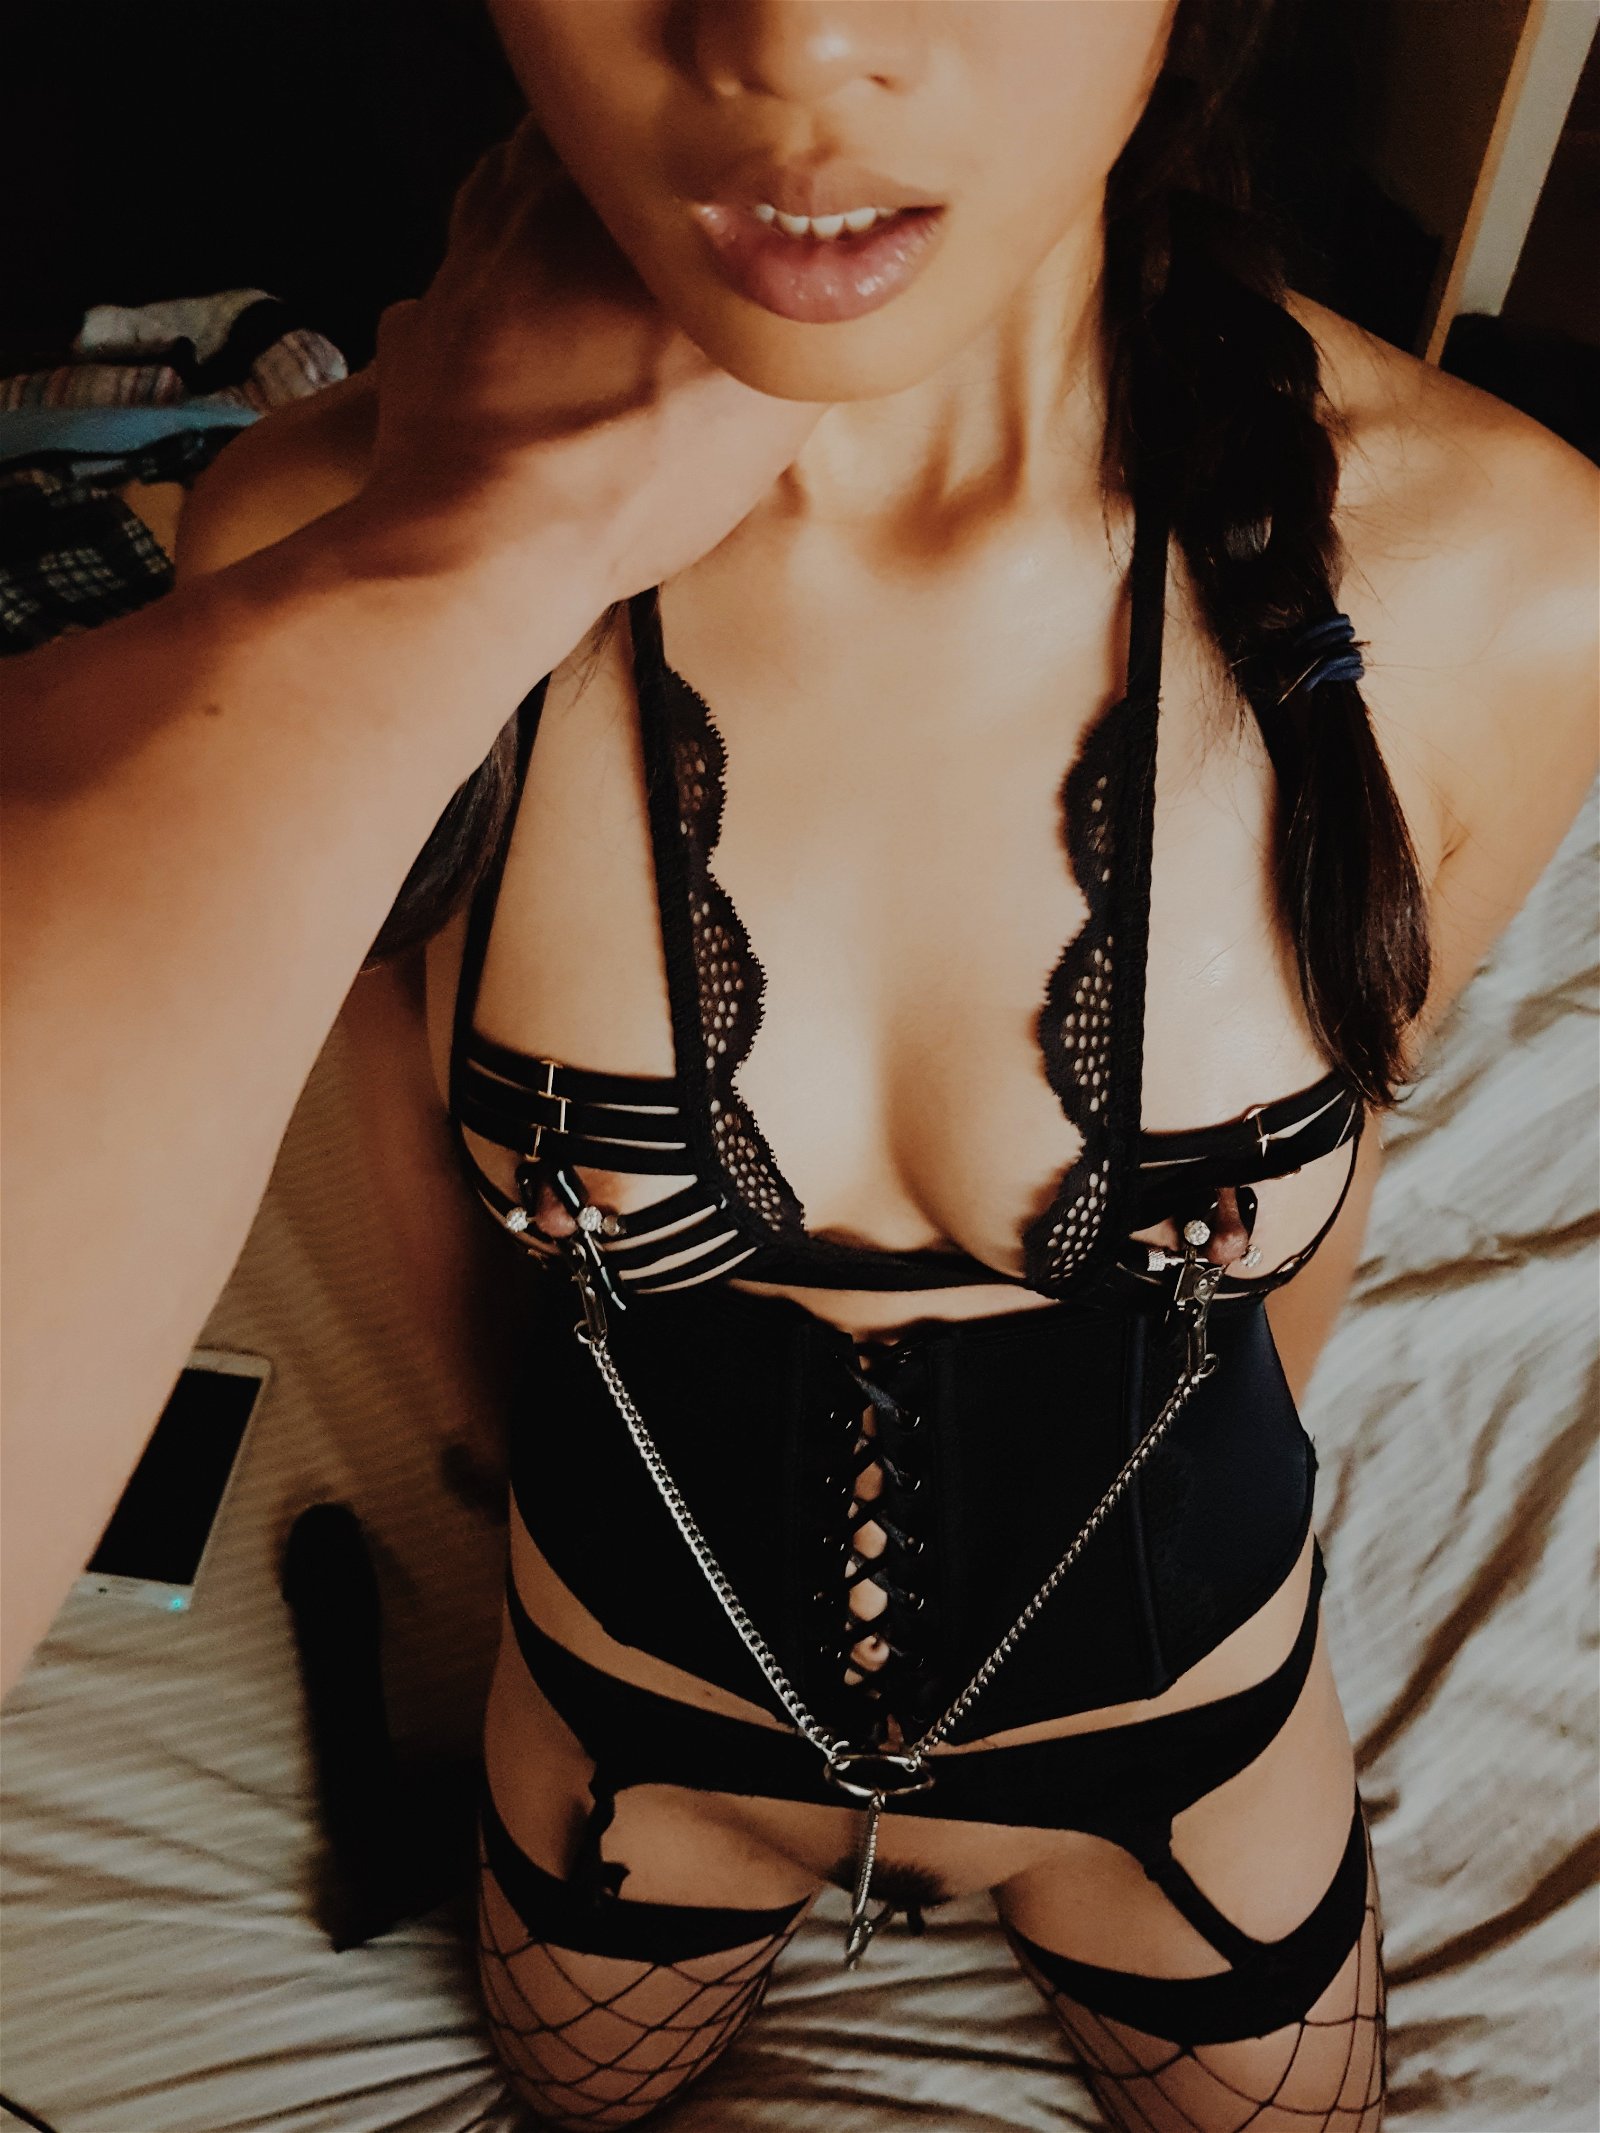 Photo by Akobw with the username @Akobw,  January 20, 2018 at 2:29 PM and the text says 'daddysfacefuckprincess:

Daddy’s good little slave #asian  #girl  #Bdsm  #Pierced  #nipples  #Nipple  #clamps  #Toys  #Bondage  #Nipple  #play  #Sexy  #Fit  #Horny  #Asian  #Real  #couple  #black  #lingerie  #garter  #belt  #stockings  #pantieless  #dd/lg..'